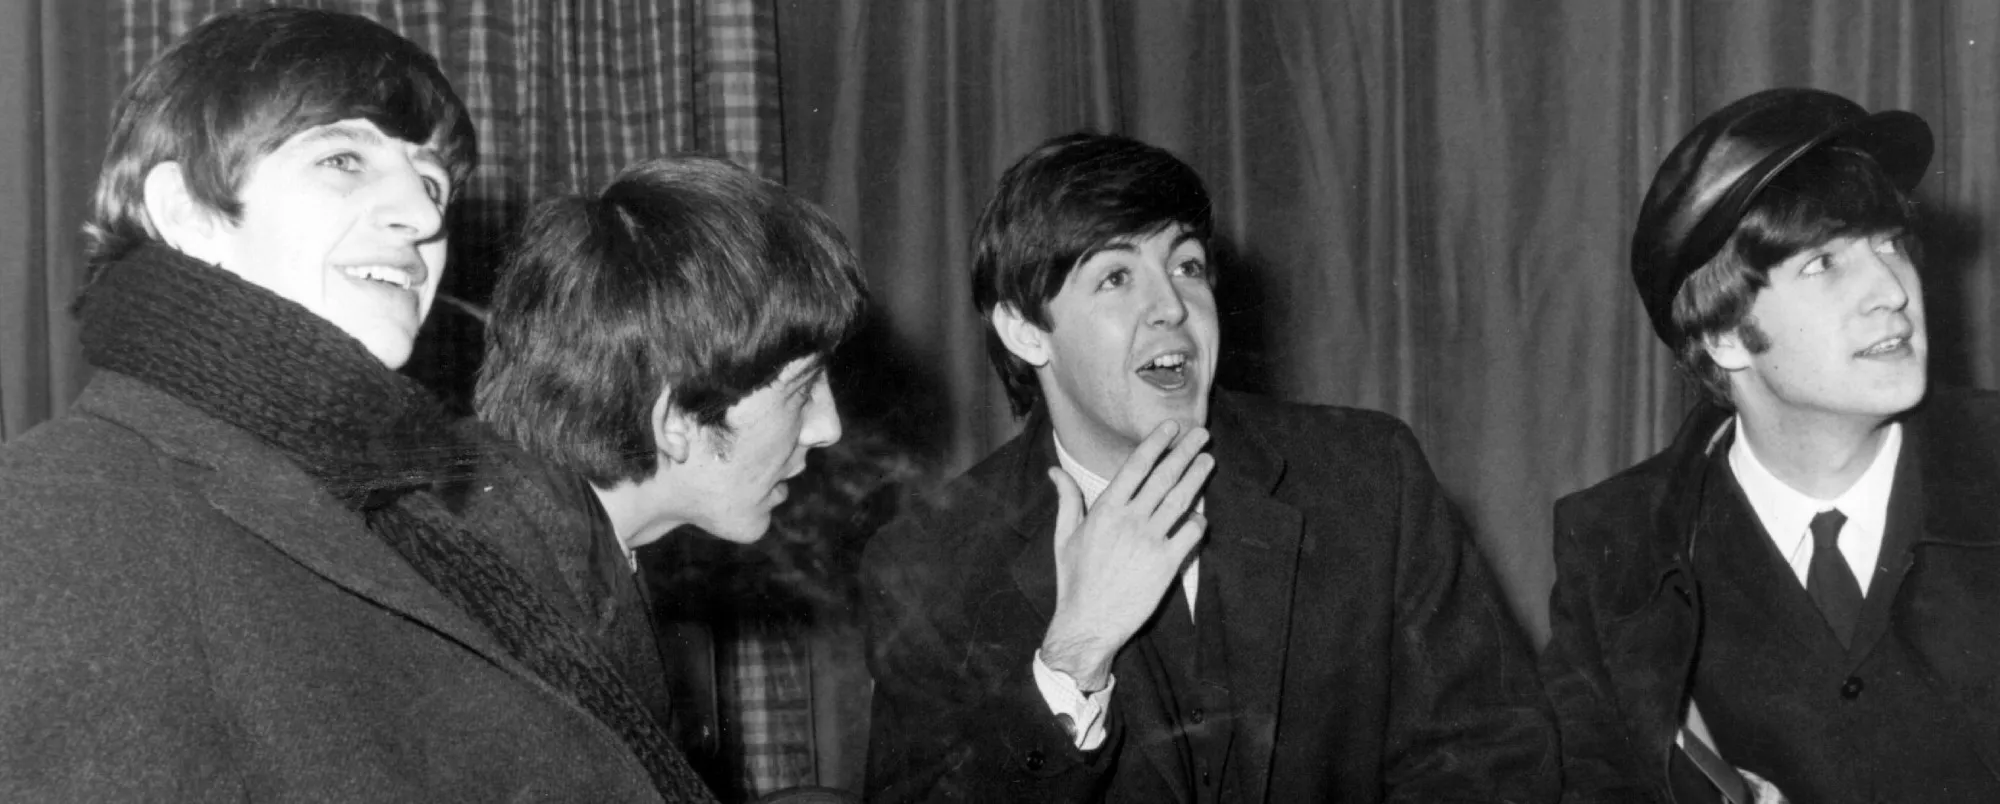 8 Iconic Beatles Songs That Never Hit No. 1 on Billboard’s Hot 100 Chart